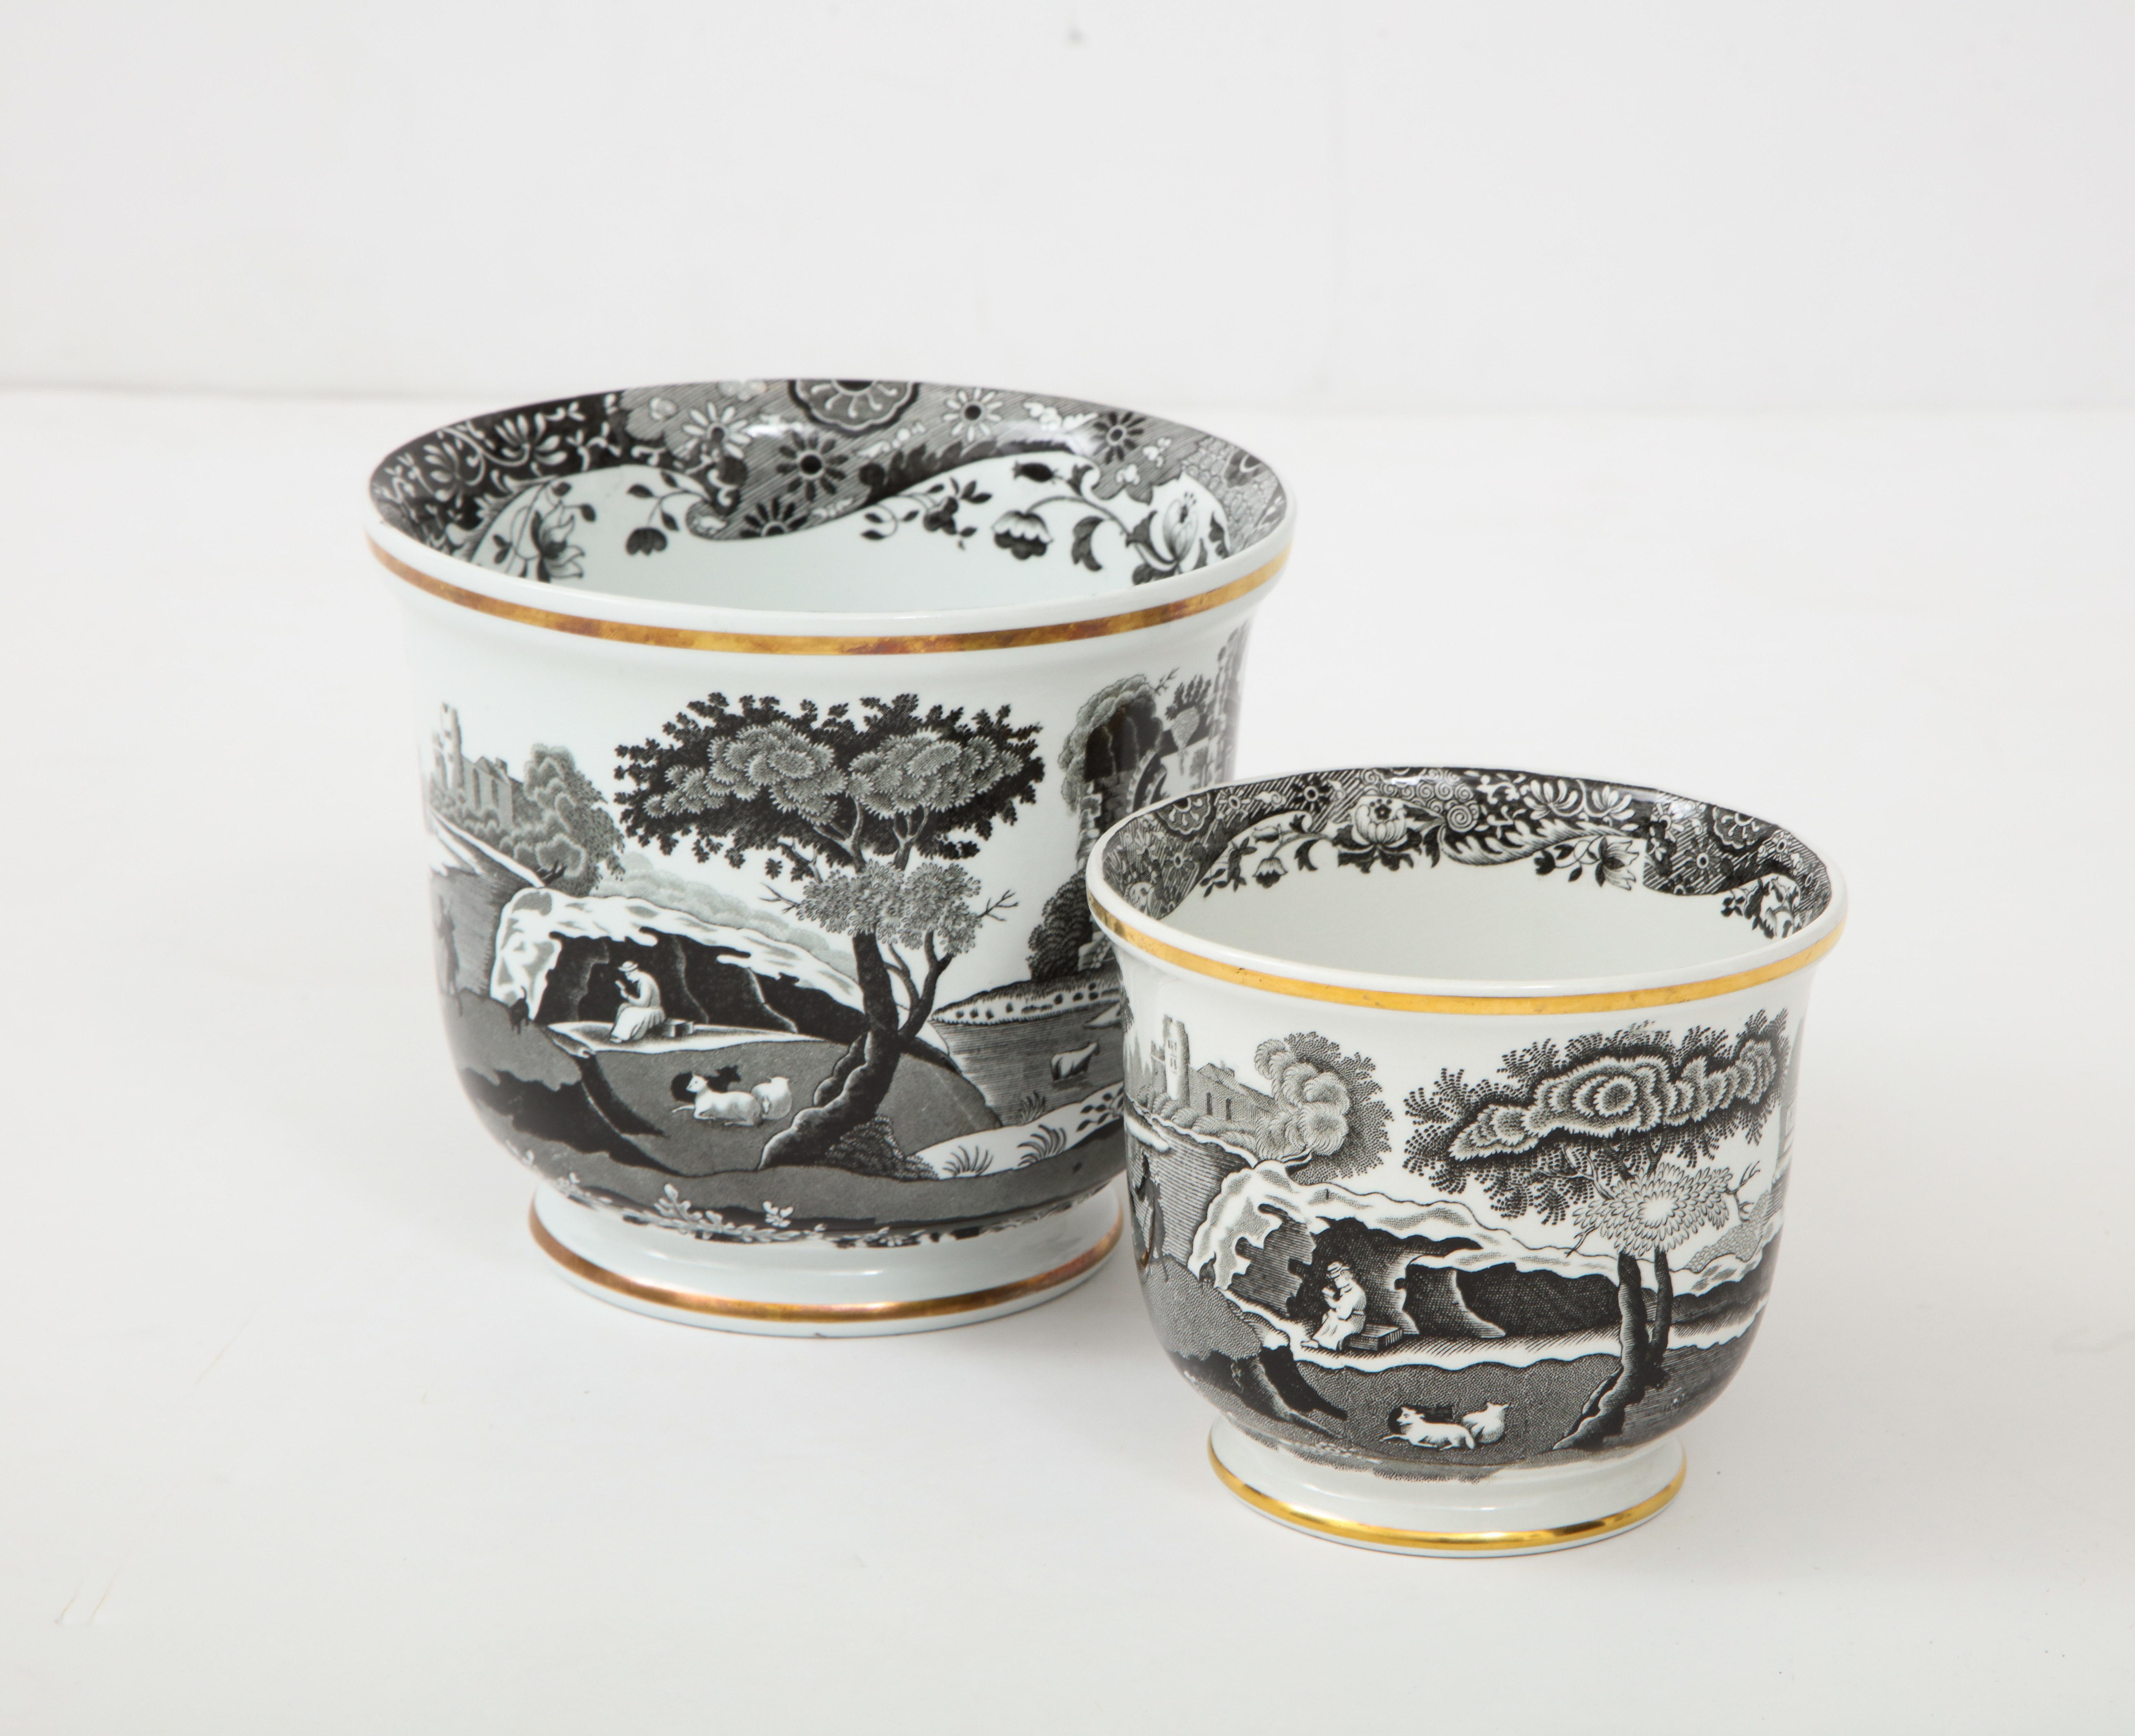 20th Century Pair of Spode Black and White Cachepots